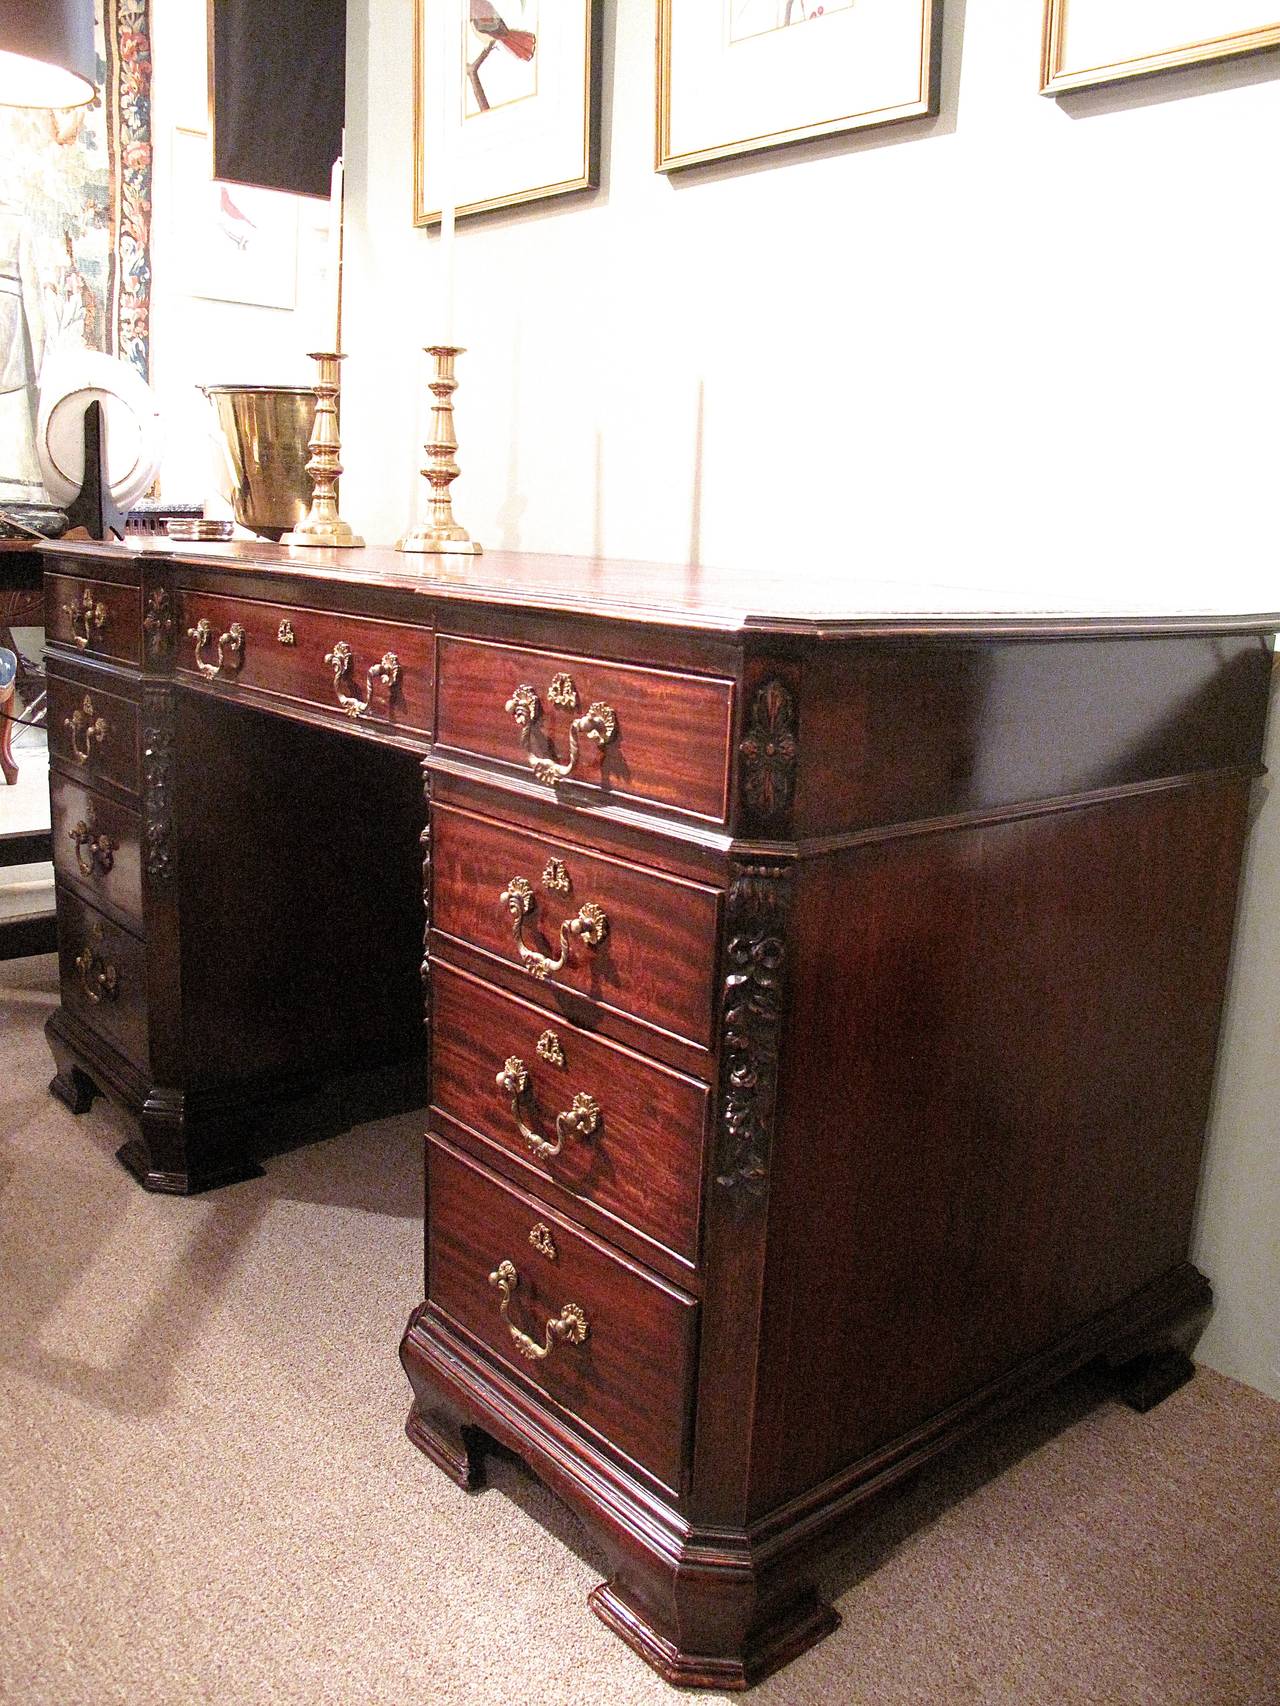 A fine Edwardian era pedestal desk, in the Chippendale manner, with fine gilt brass hardware, good carving on the canted corners and shaped bracket feet supporting each pedestal. Burgundy leather top and working locks.